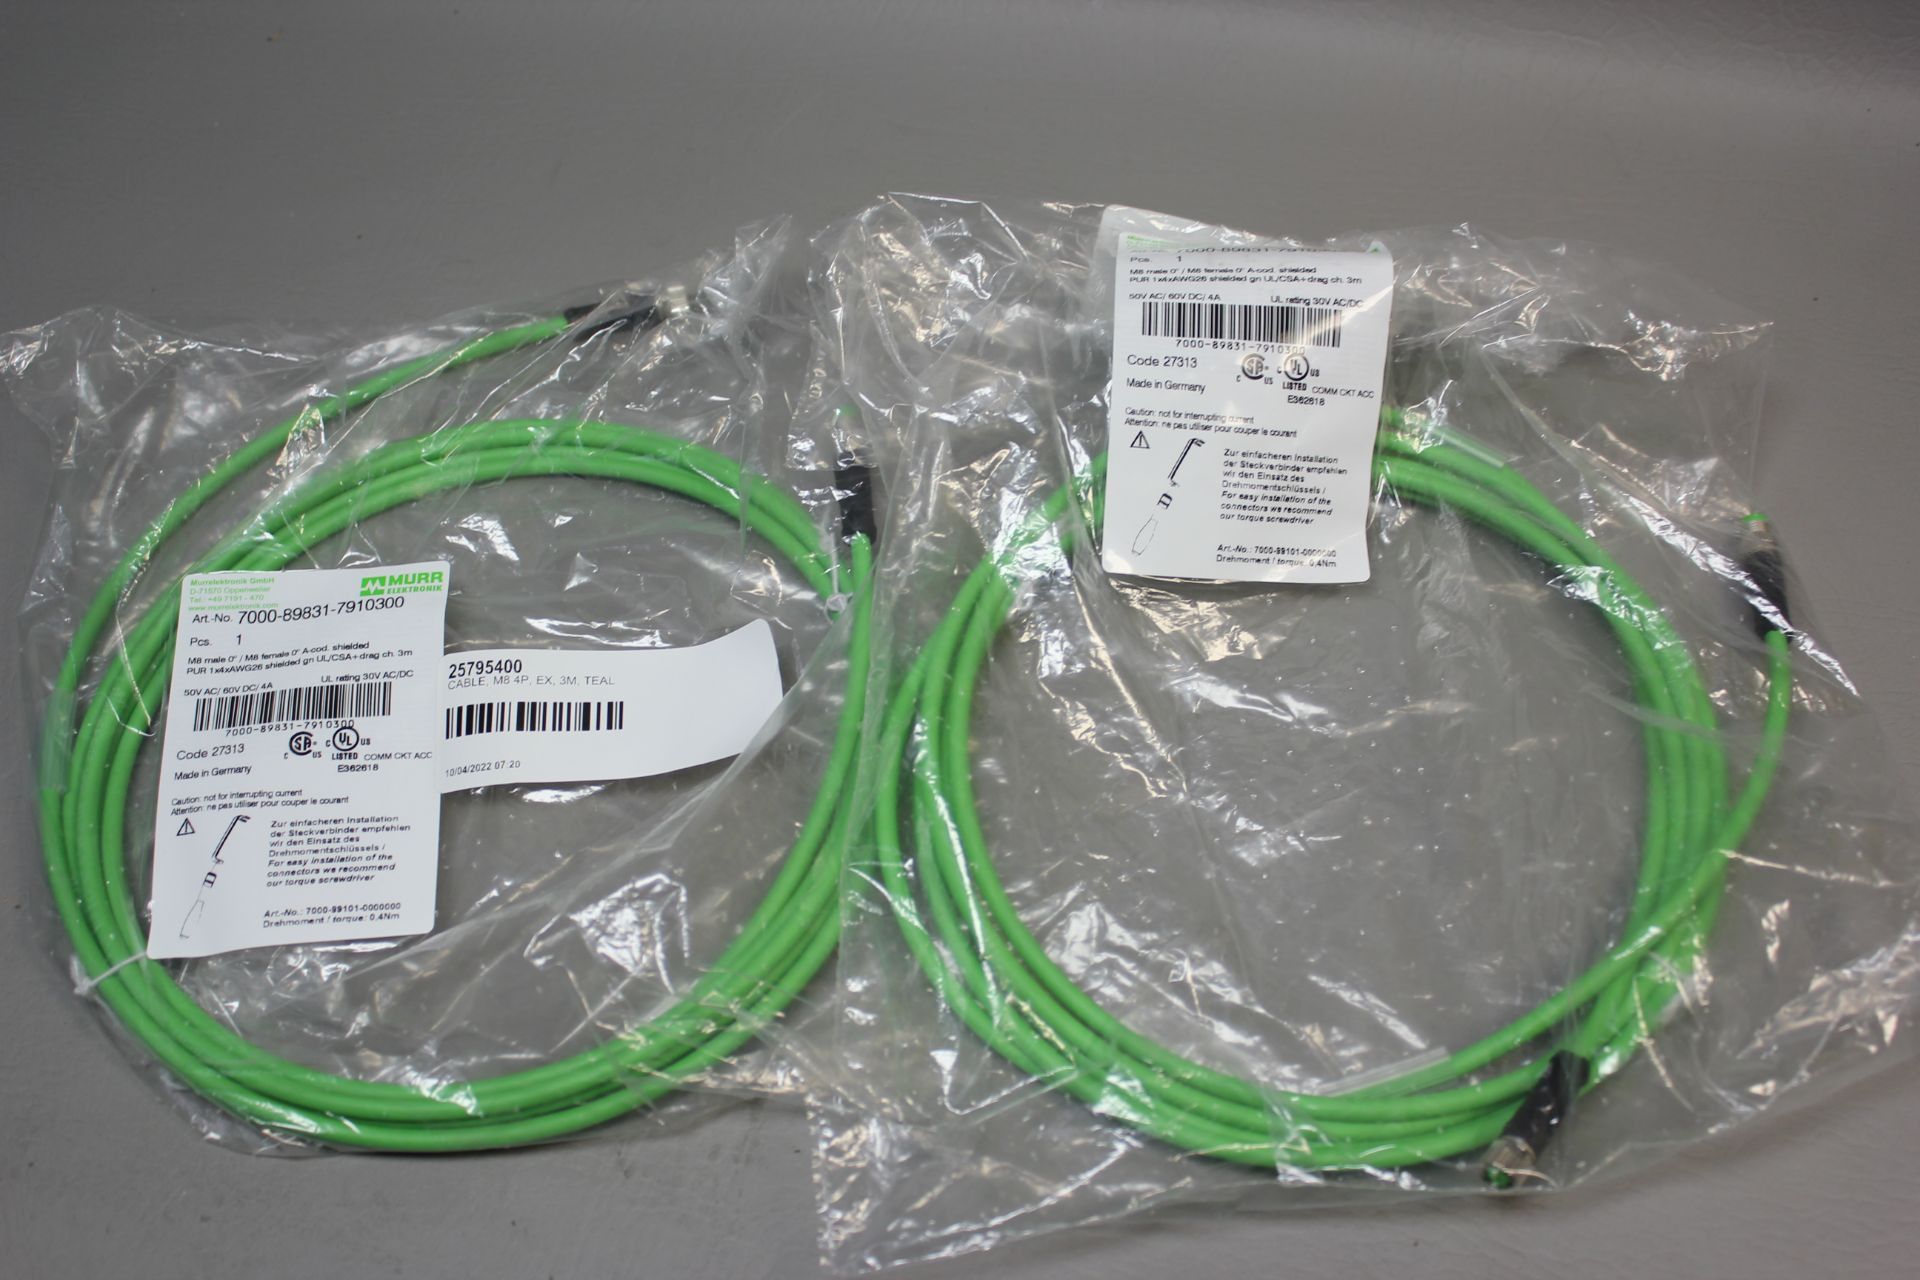 LOT OF 2 NEW MURR CABLE ASSEMBLIES